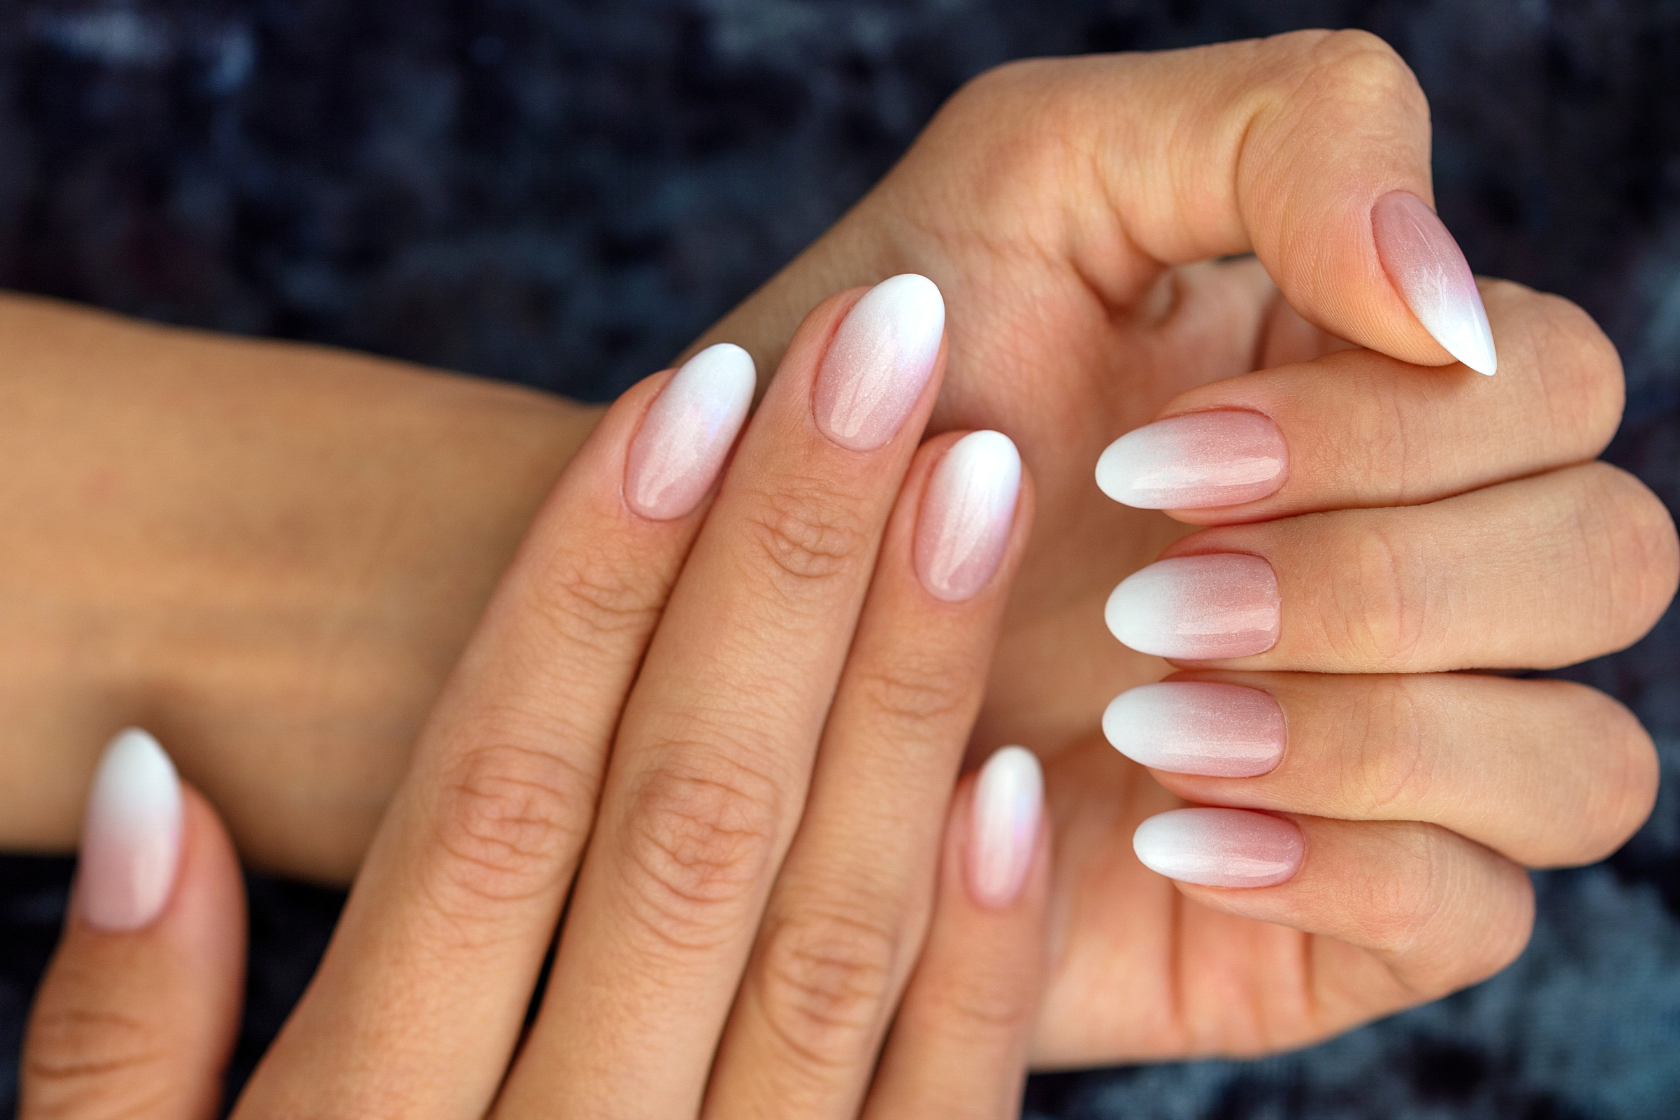 Ombre nails: 10 easy designs and ideas to try at home